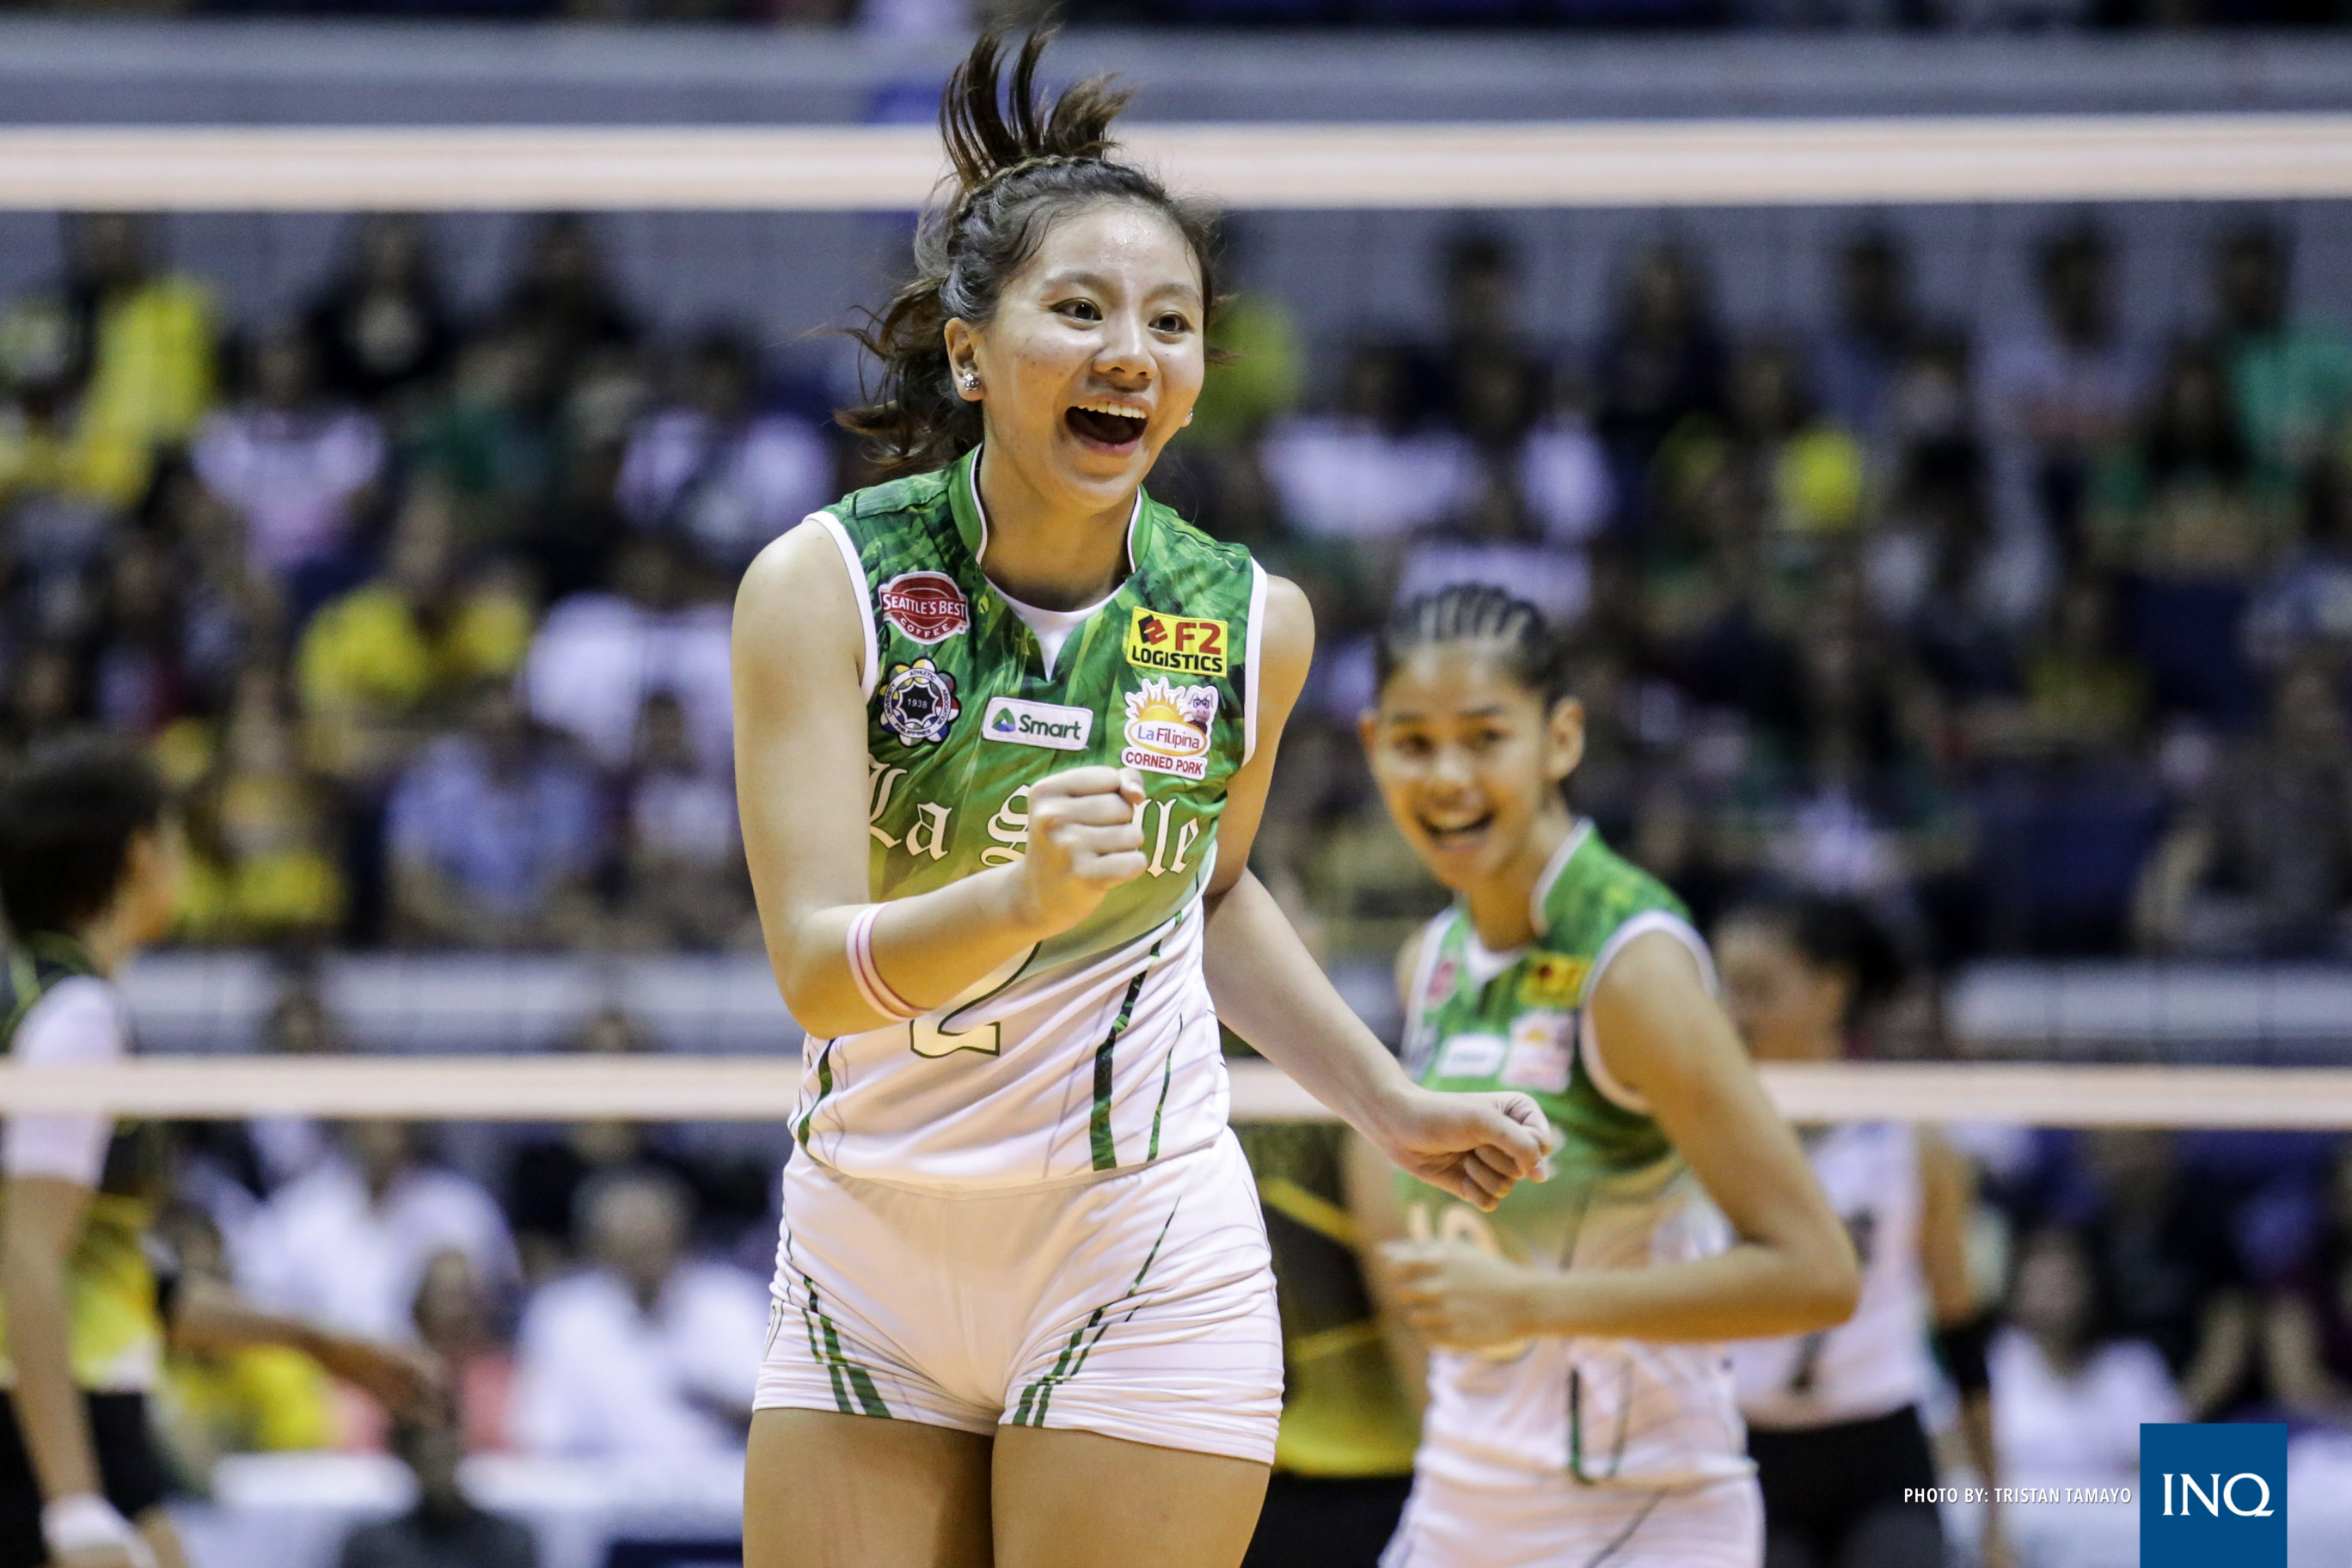 La Salle's Desiree Cheng. Photo by Tristan Tamayo/INQUIRER.net